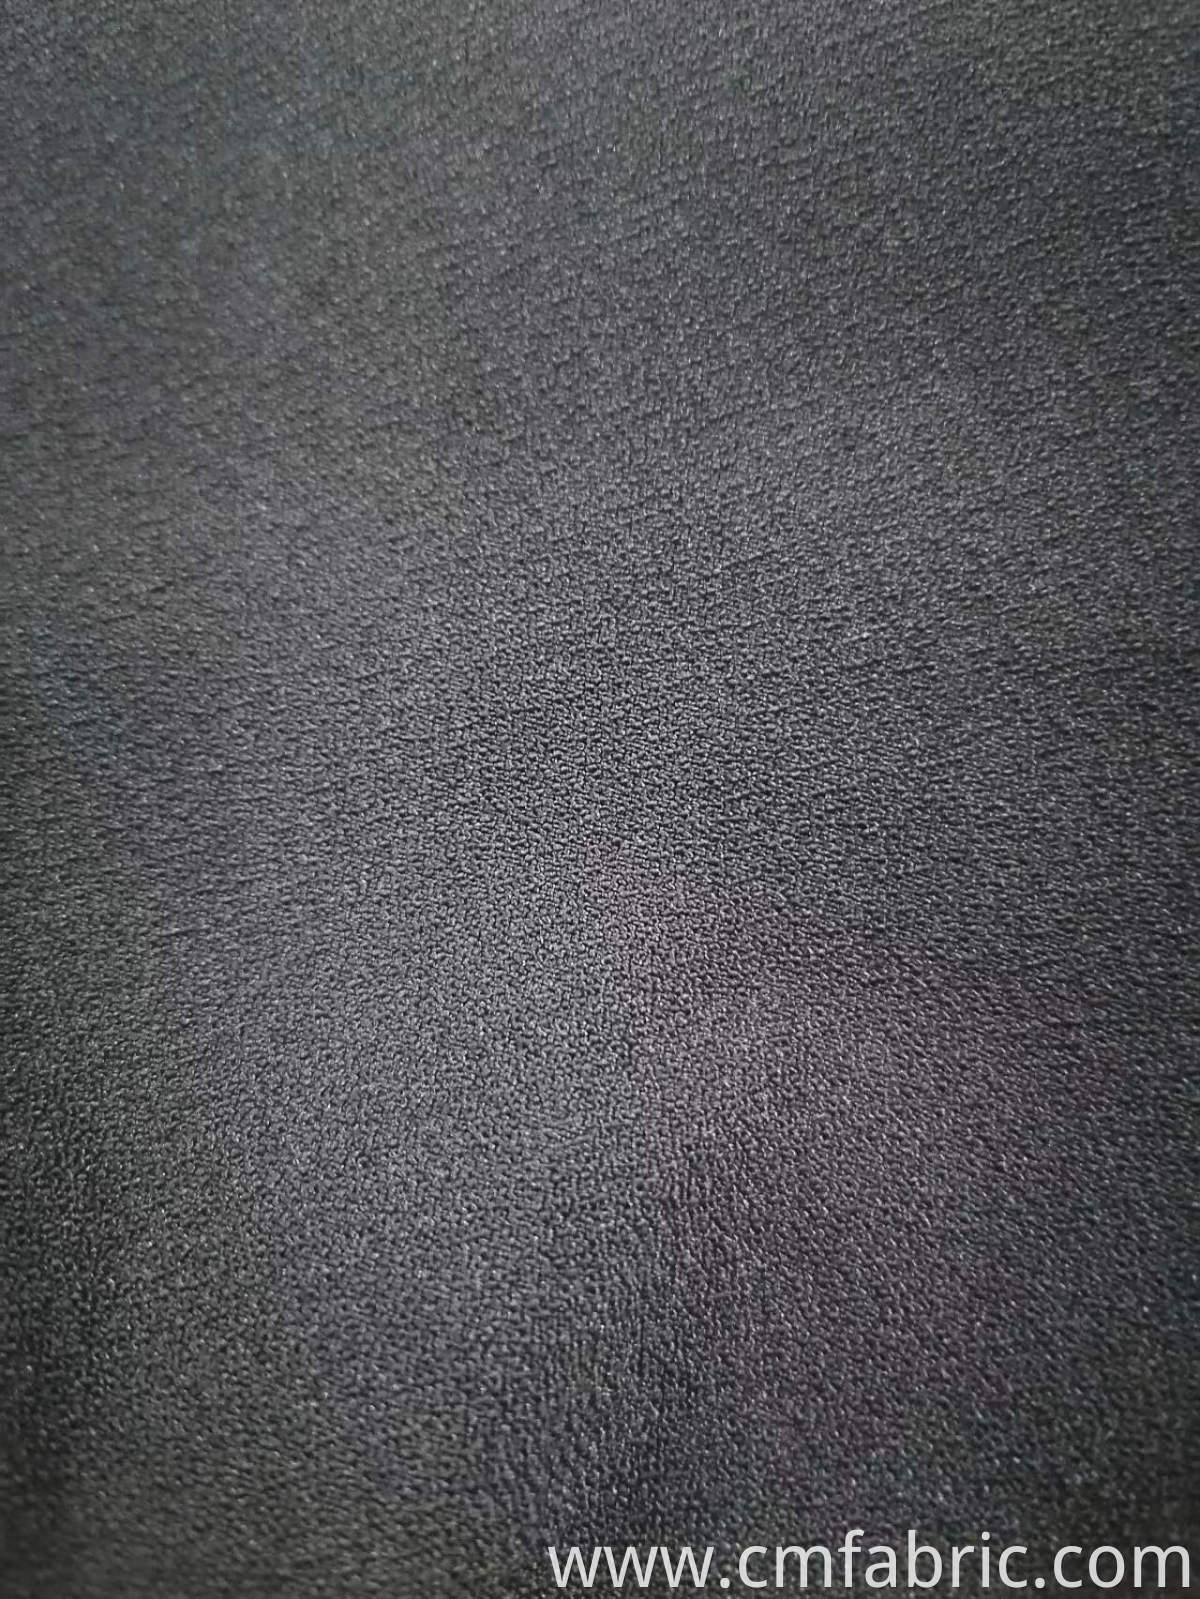 woven polyester spandex fabric